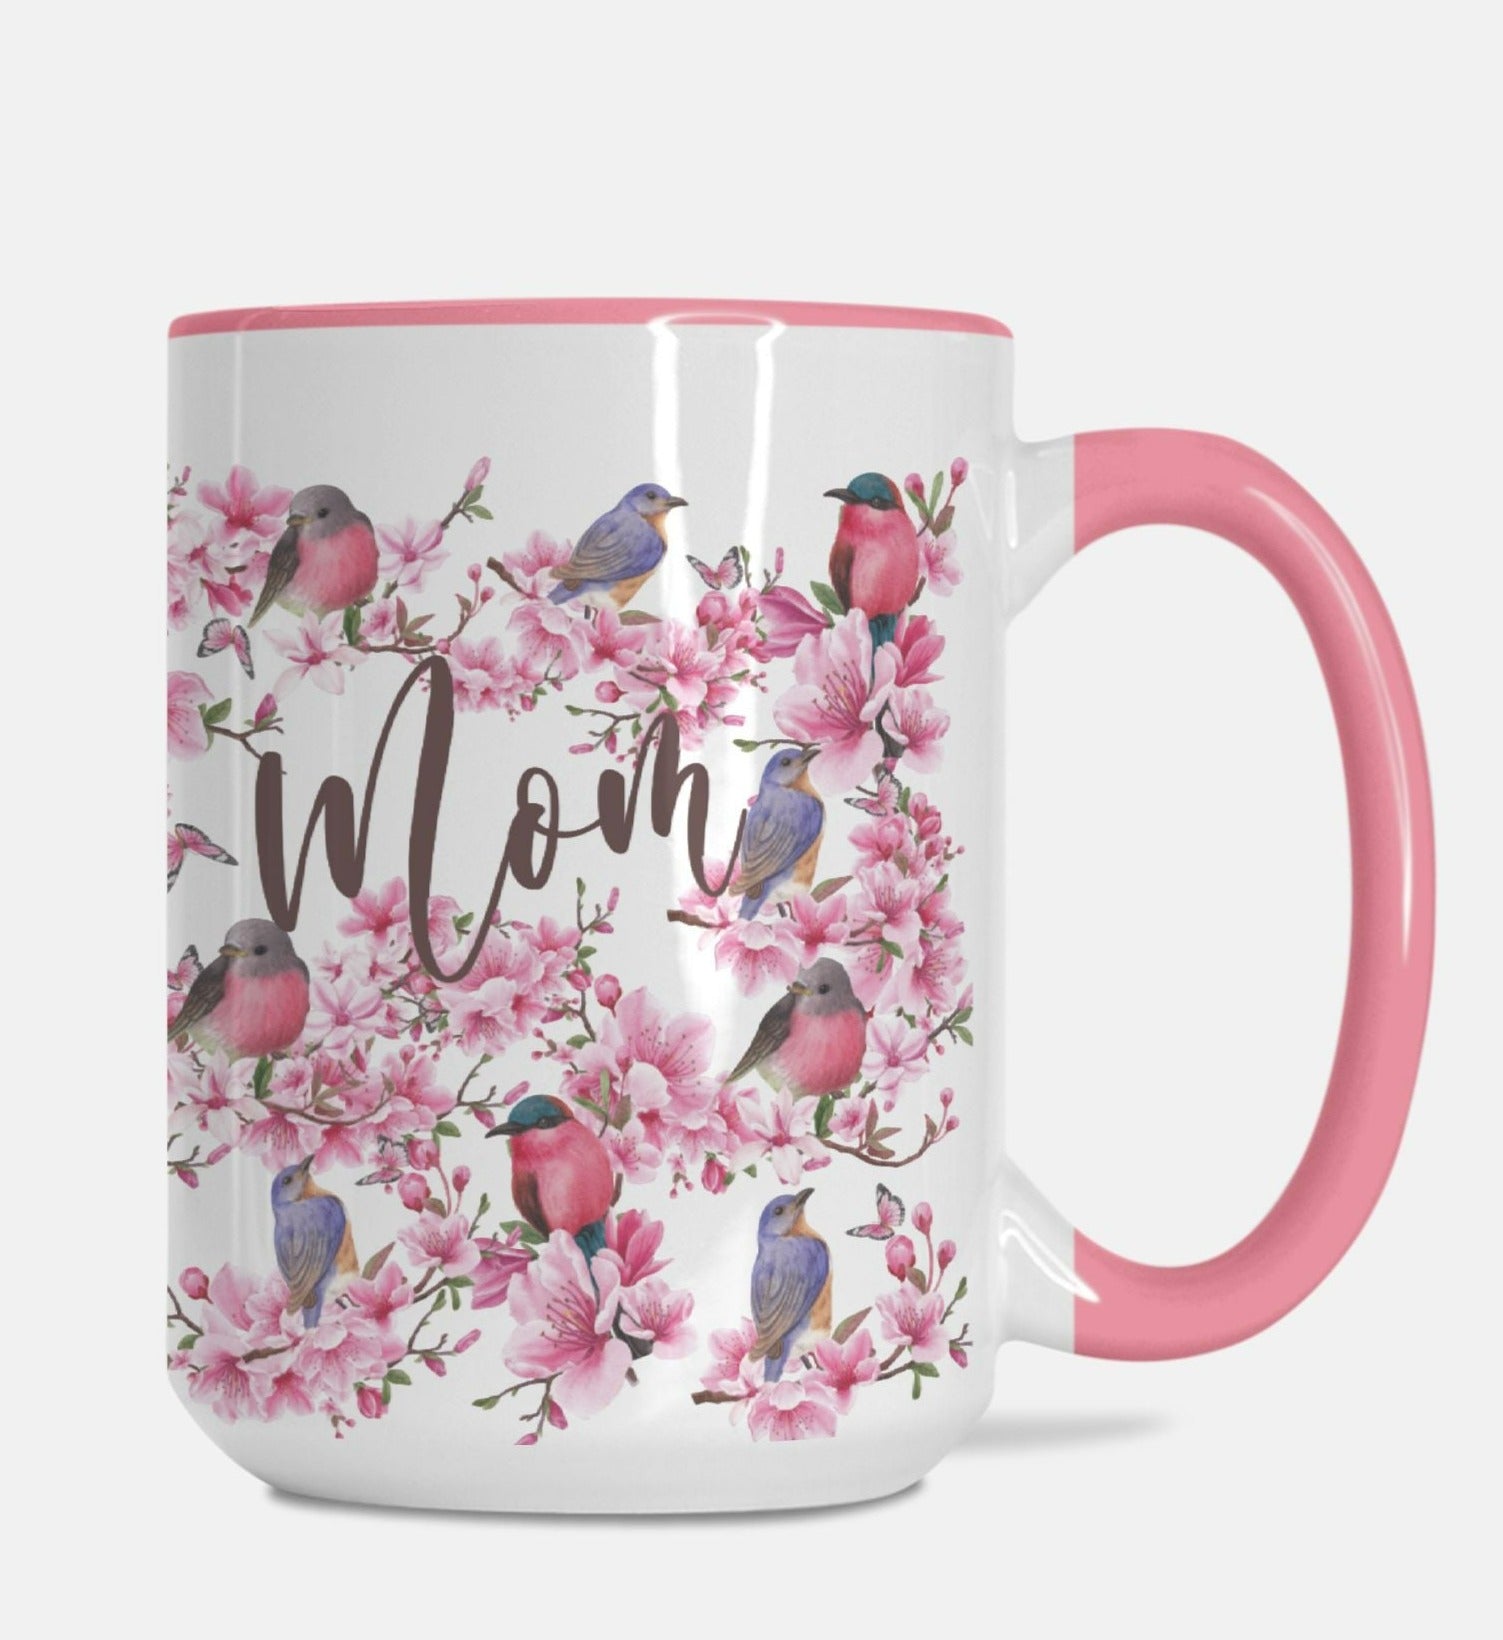 Personalized mug for mom with cherry blossom, bird and butterfly print. Perfect for spring or summer decor or as a mother's day gift